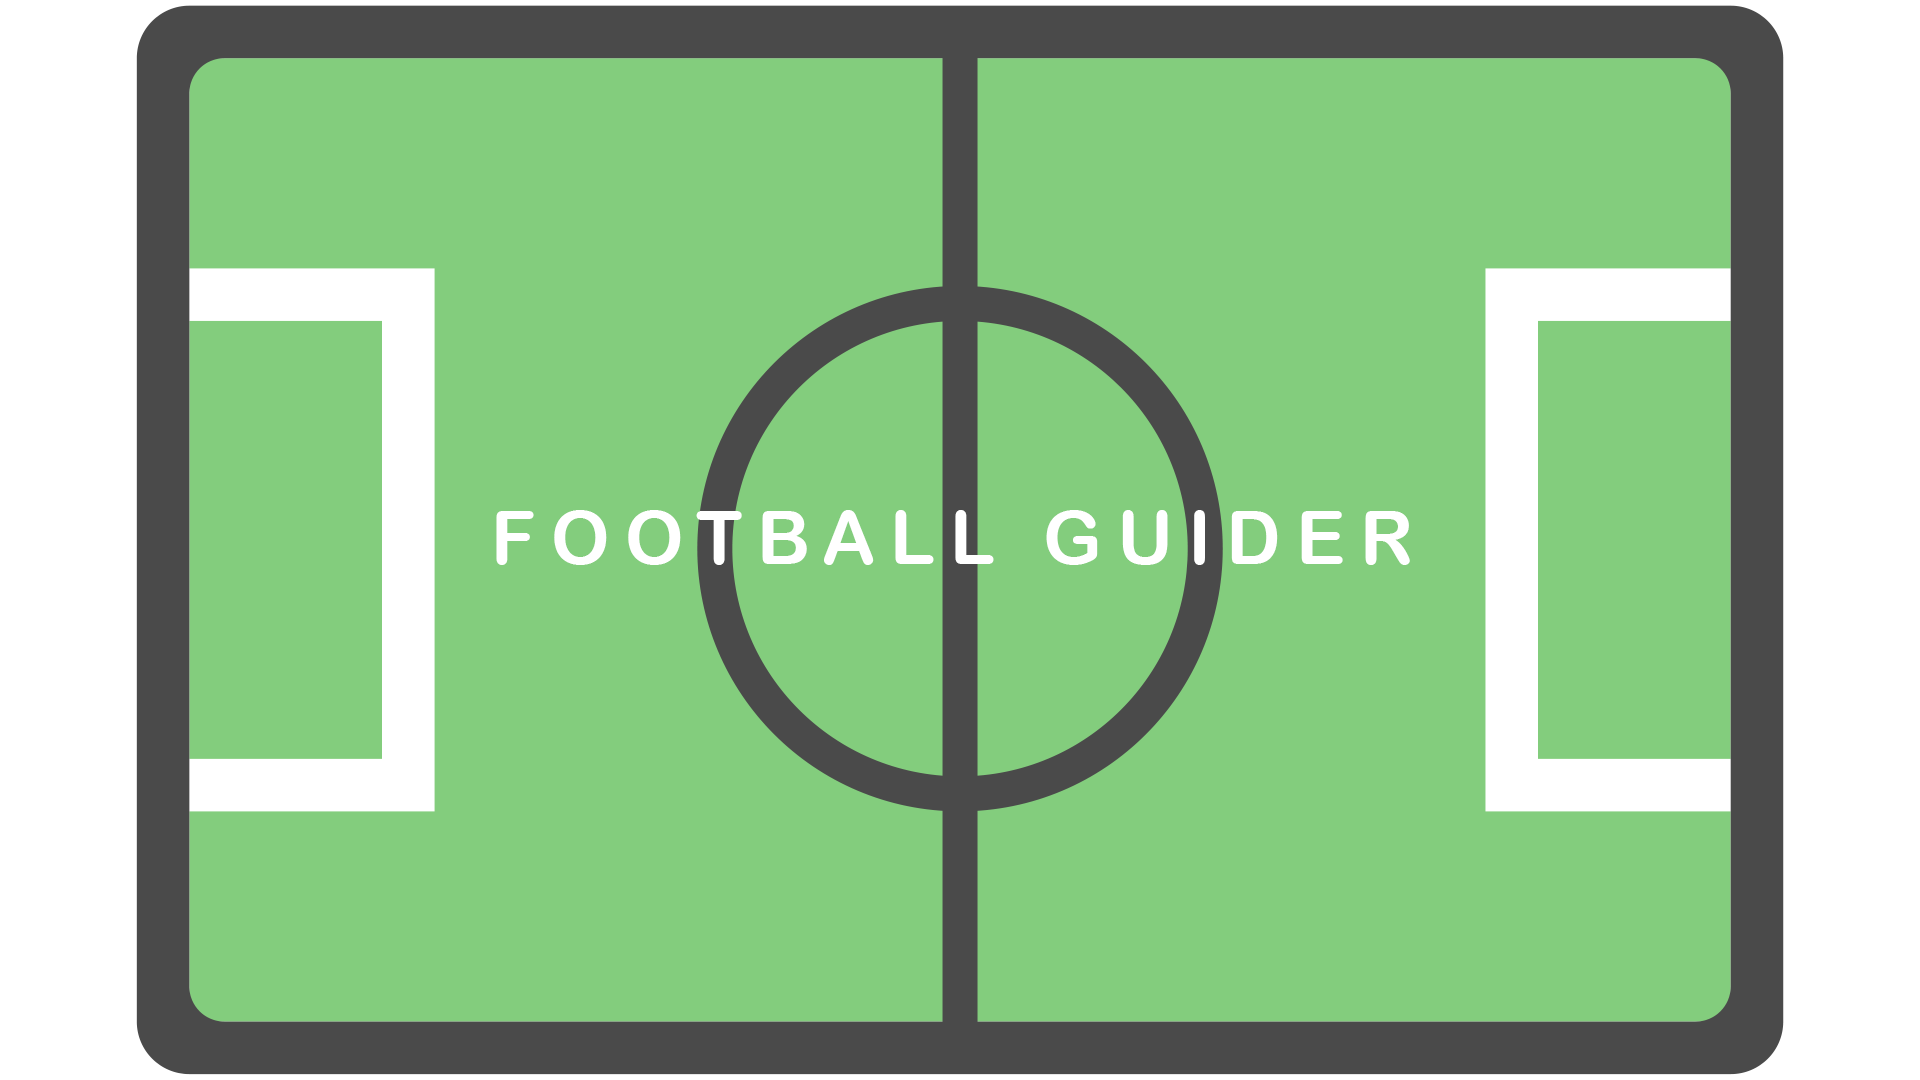 Football Guider Logo, comprised of a cartoon football pitch with the words "FOOTBALL GUIDER" horizontally through the middle